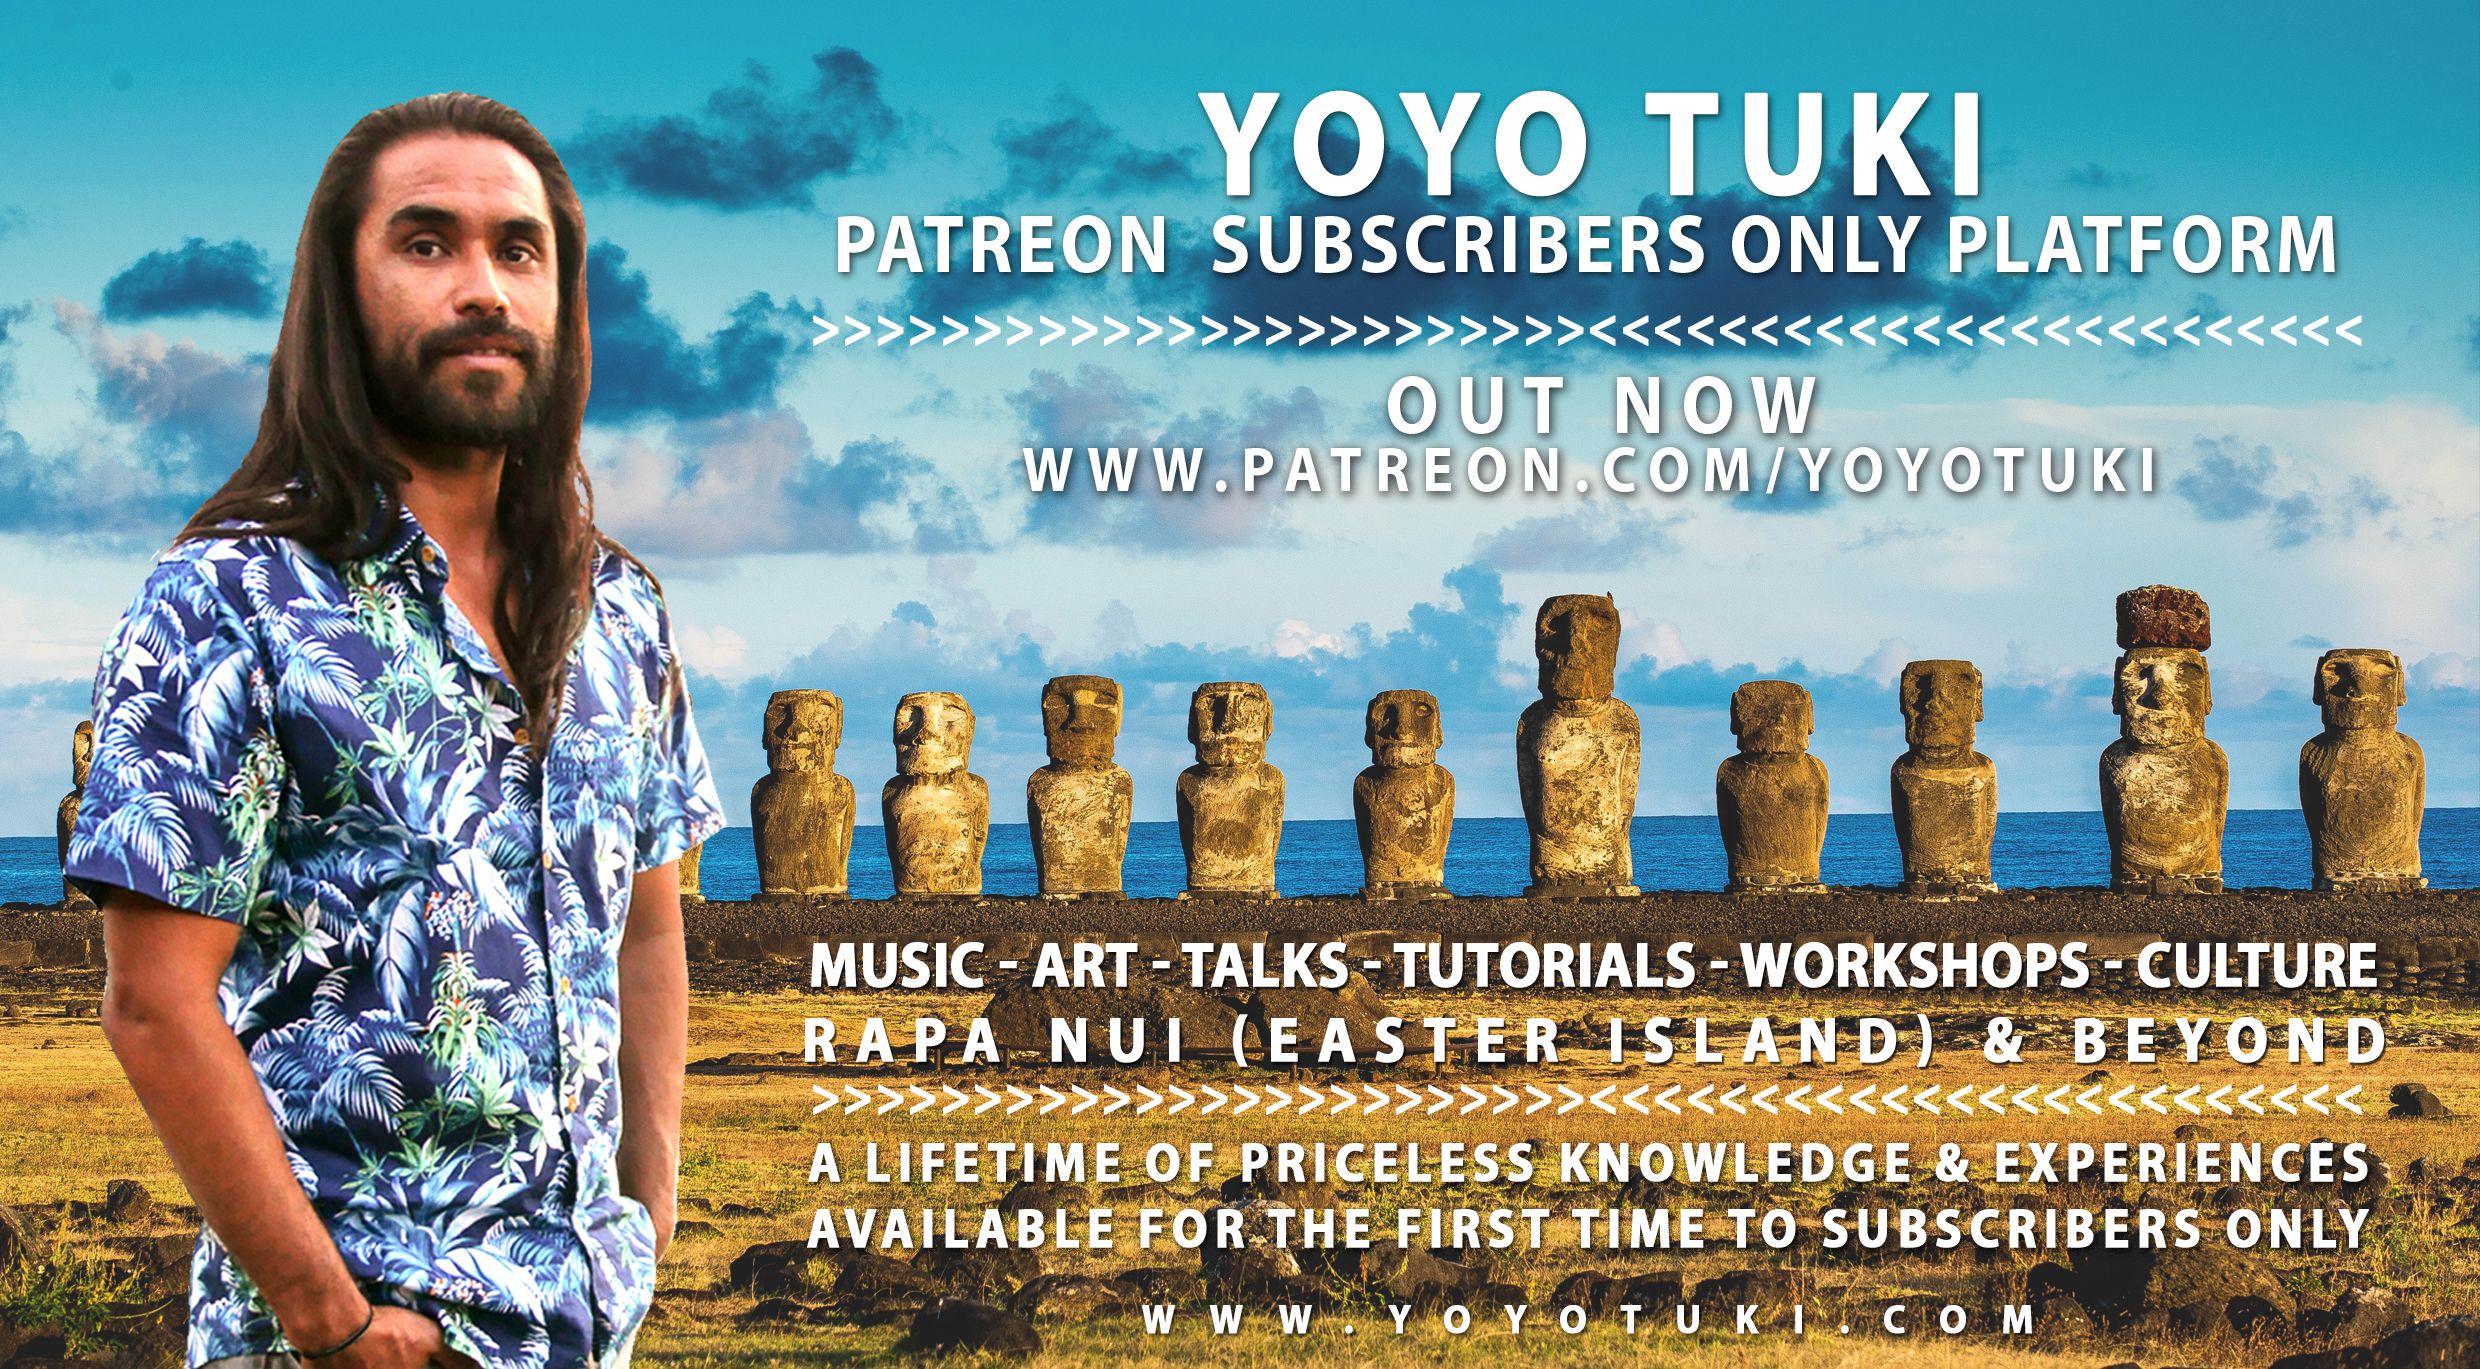 OUT NOW! Yoyo's Patreon Subscribers Only Platform!